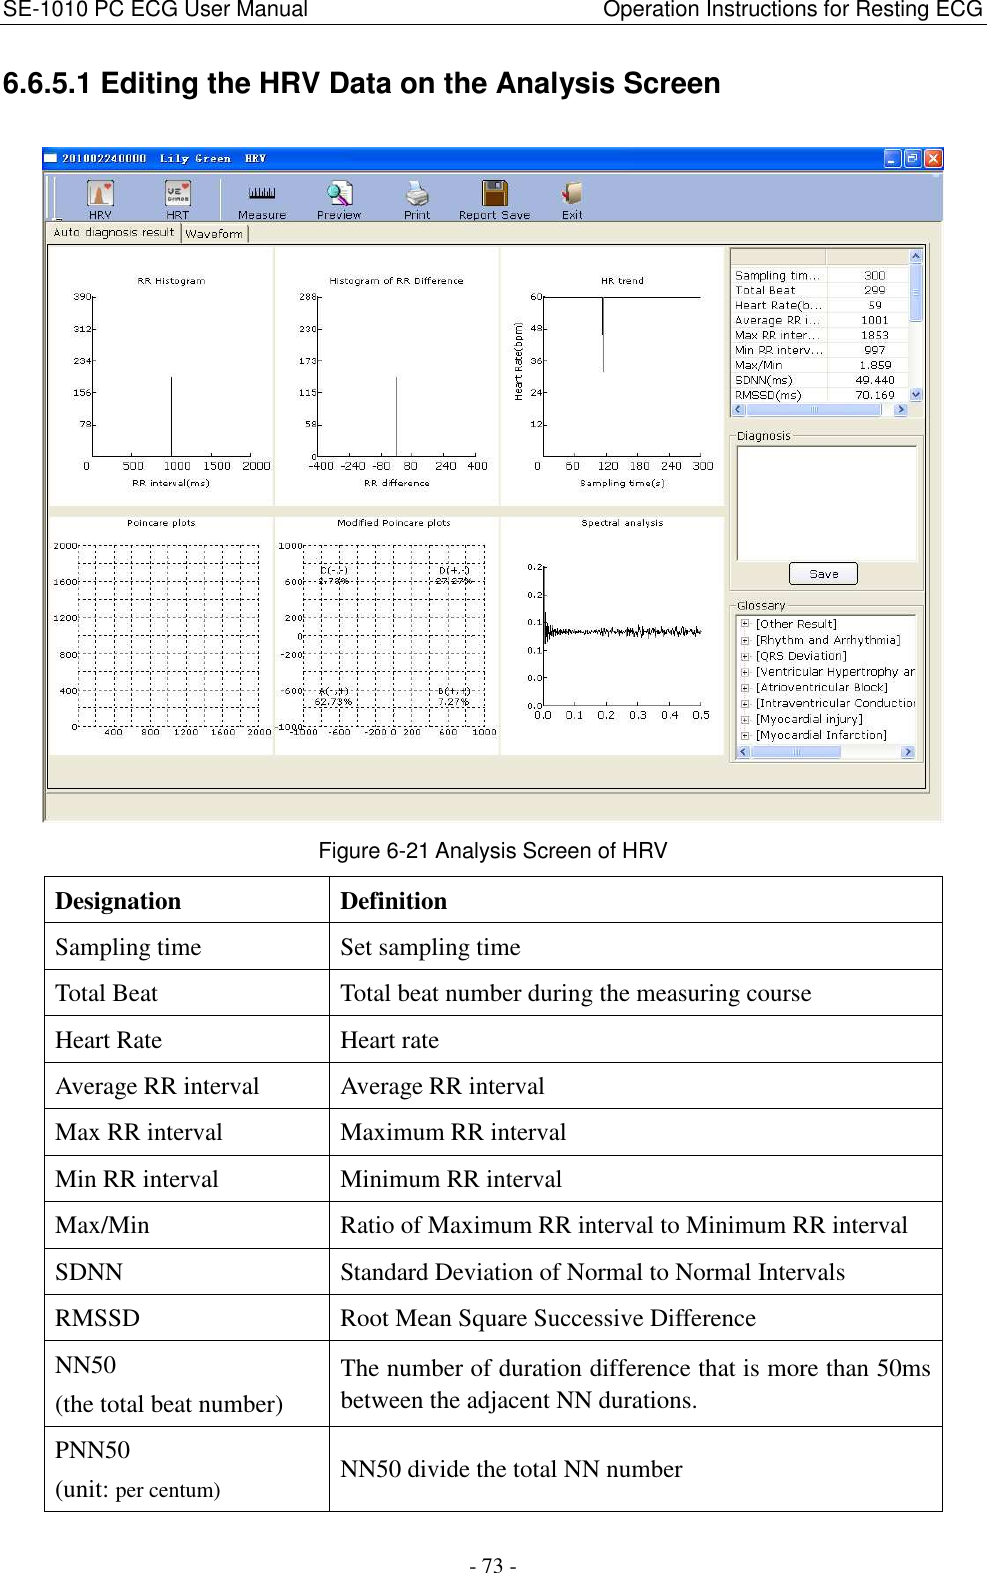 SE-1010 PC ECG User Manual                                                      Operation Instructions for Resting ECG - 73 - 6.6.5.1 Editing the HRV Data on the Analysis Screen  Figure 6-21 Analysis Screen of HRV Designation  Definition Sampling time  Set sampling time Total Beat  Total beat number during the measuring course Heart Rate  Heart rate Average RR interval  Average RR interval Max RR interval  Maximum RR interval Min RR interval  Minimum RR interval Max/Min  Ratio of Maximum RR interval to Minimum RR interval SDNN  Standard Deviation of Normal to Normal Intervals RMSSD  Root Mean Square Successive Difference NN50   (the total beat number) The number of duration difference that is more than 50ms between the adjacent NN durations. PNN50 (unit: per centum) NN50 divide the total NN number   